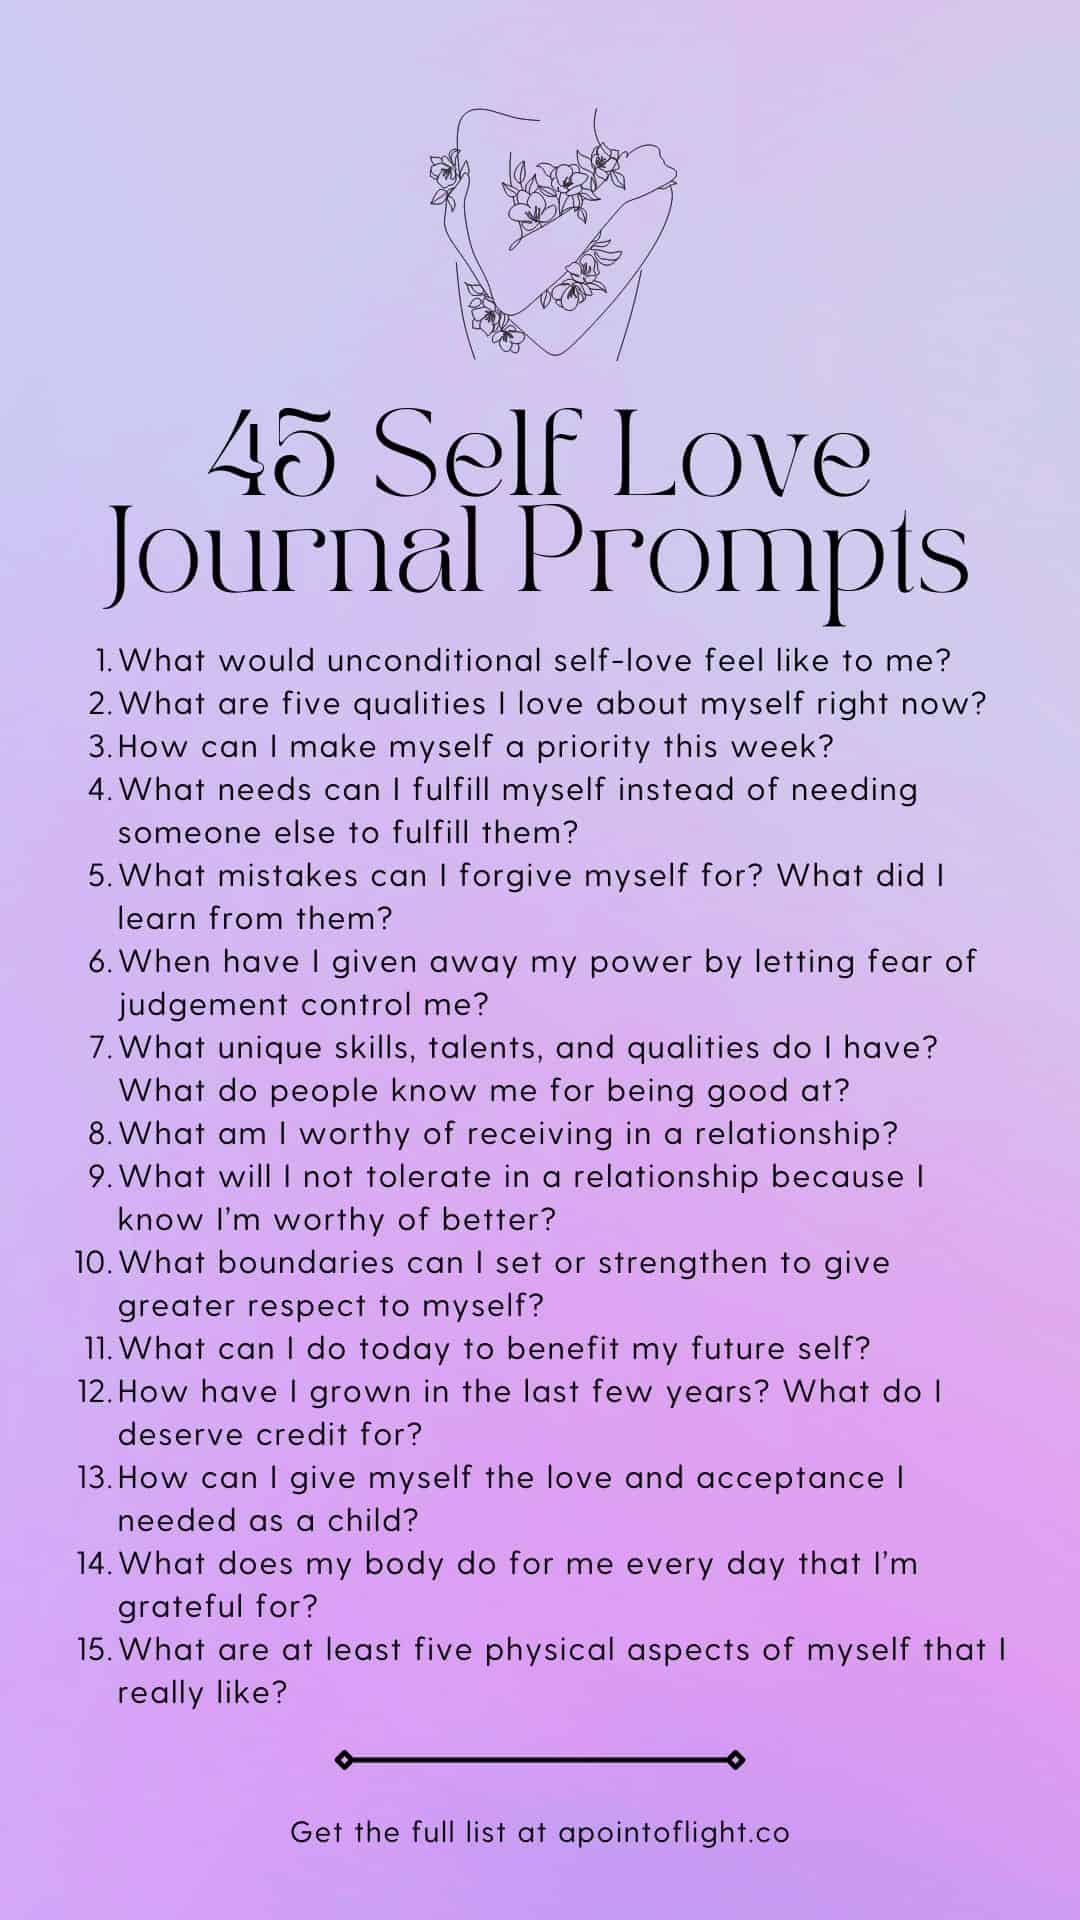 45 Self Love Journal Prompts - A Point of Light